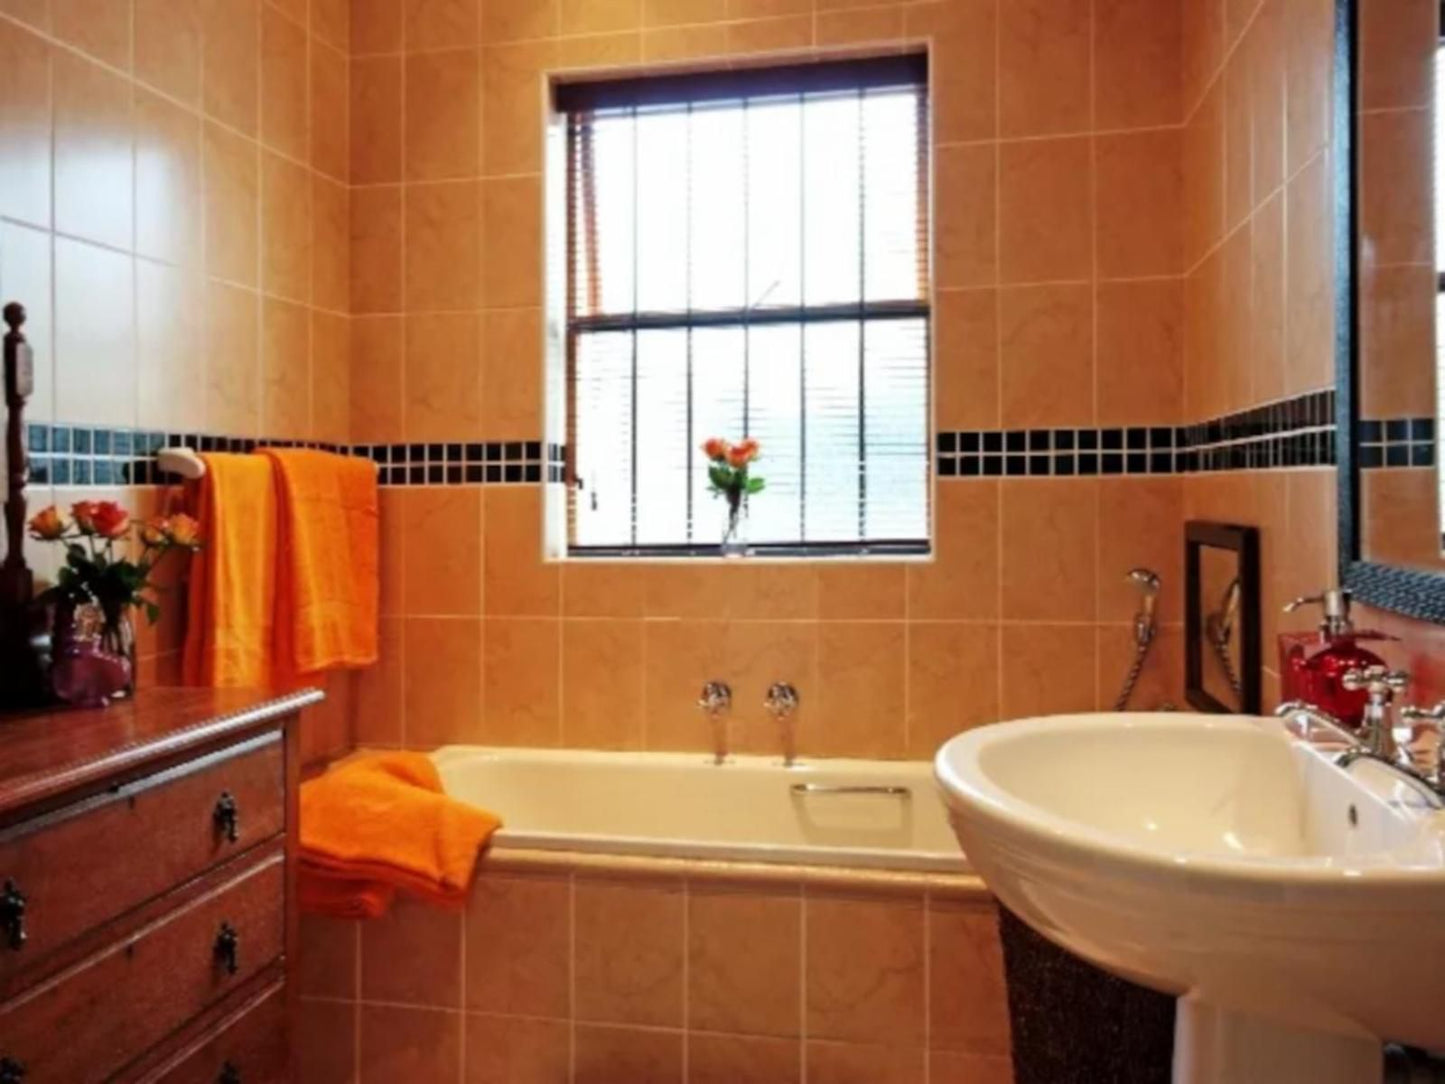 A Smart Stay Apartments Somerset Ridge Somerset West Western Cape South Africa Bathroom